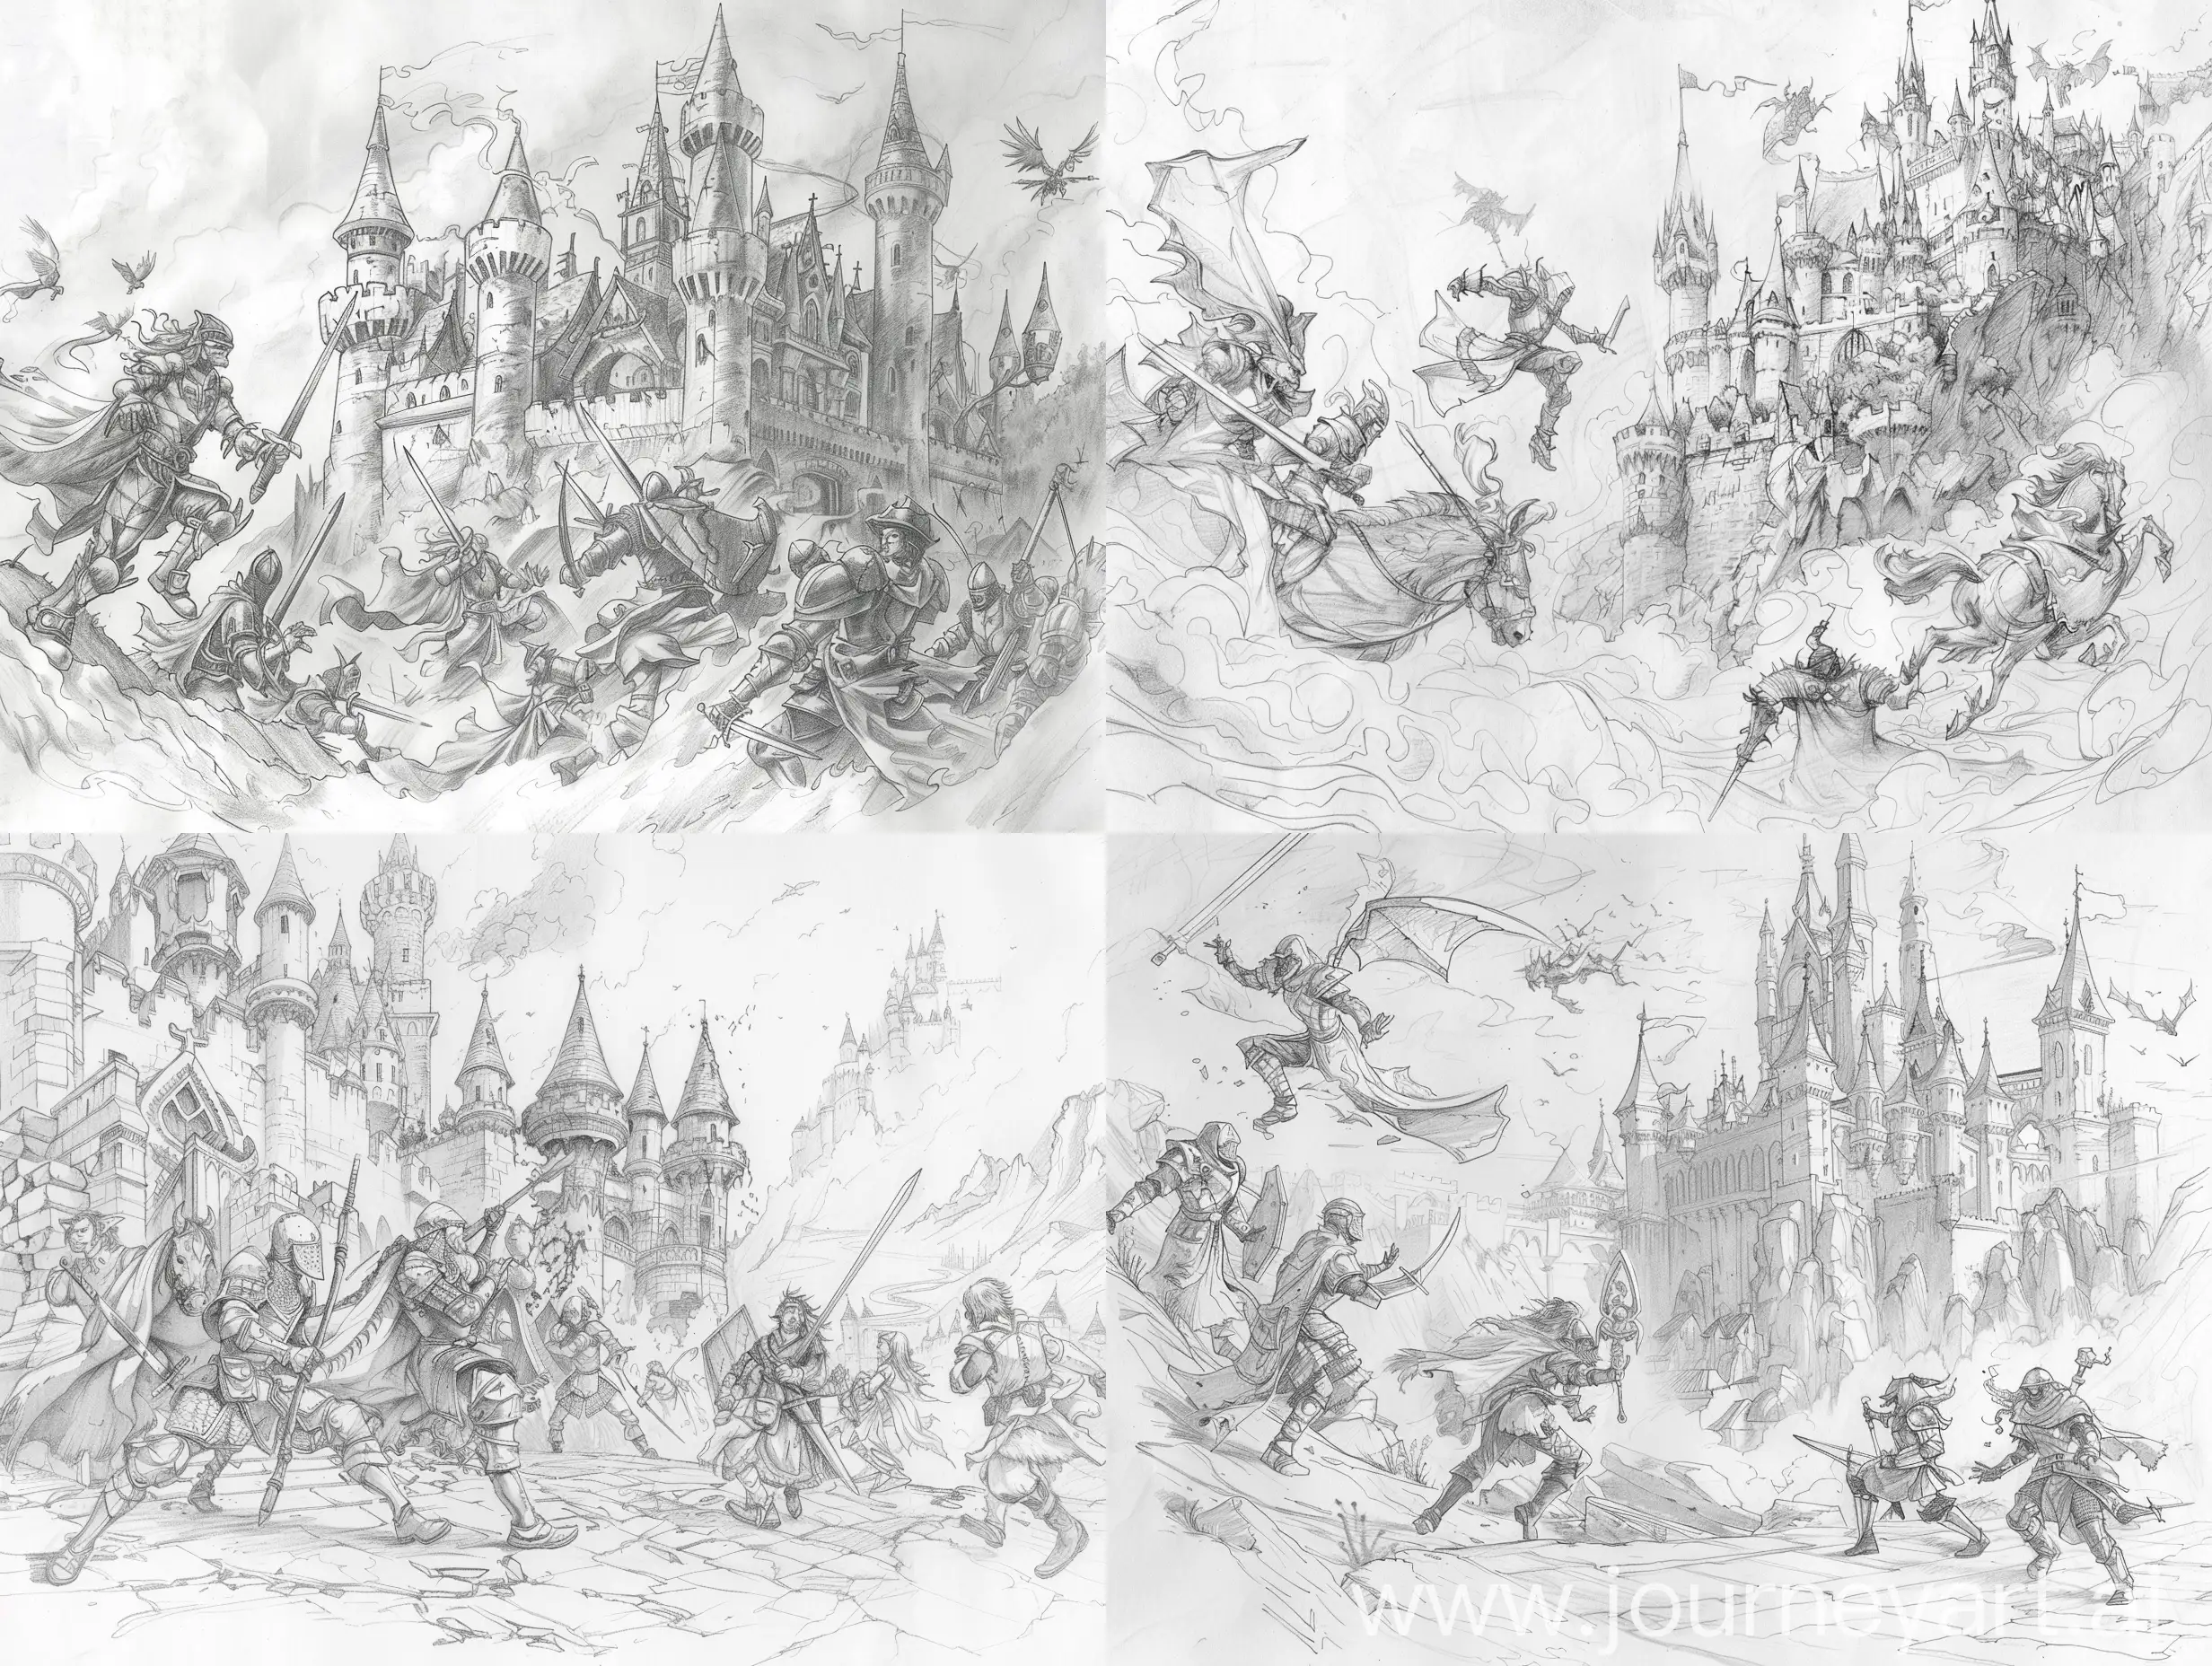 Dynamic-Poses-in-Medieval-Fantasy-Pencil-Sketch-with-Castle-Background